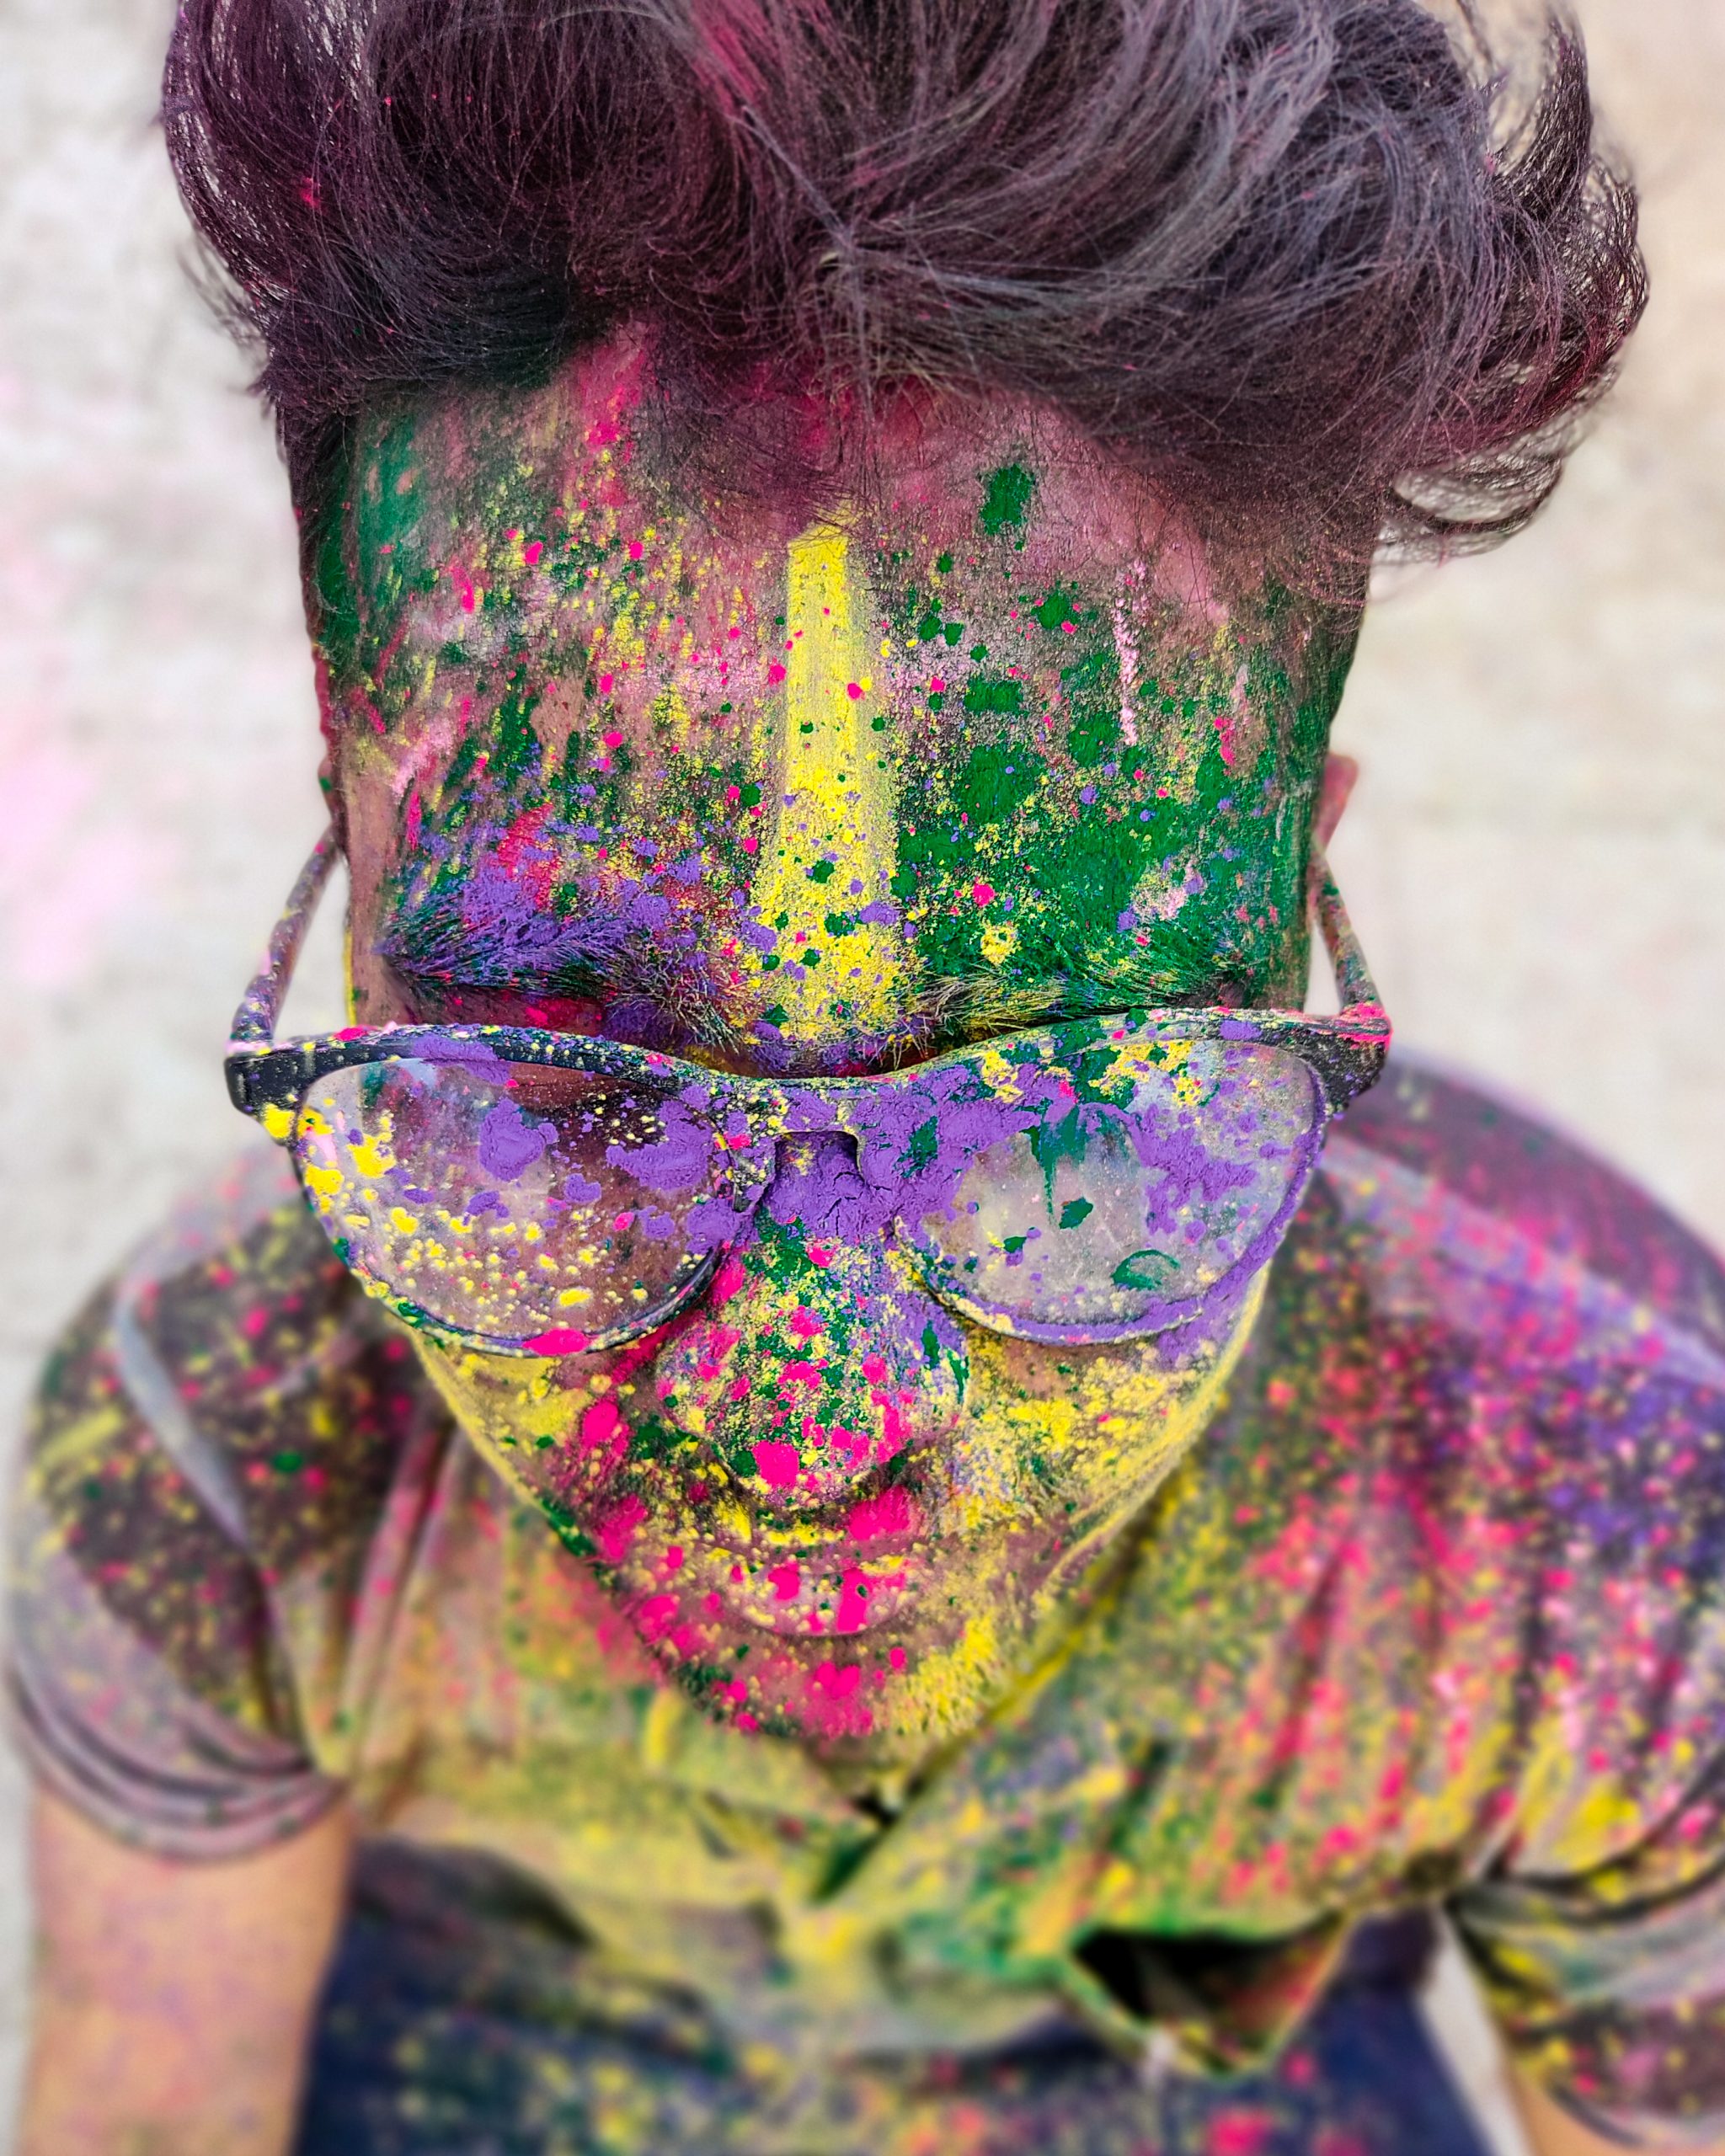 A boy's face painted with Holi colors